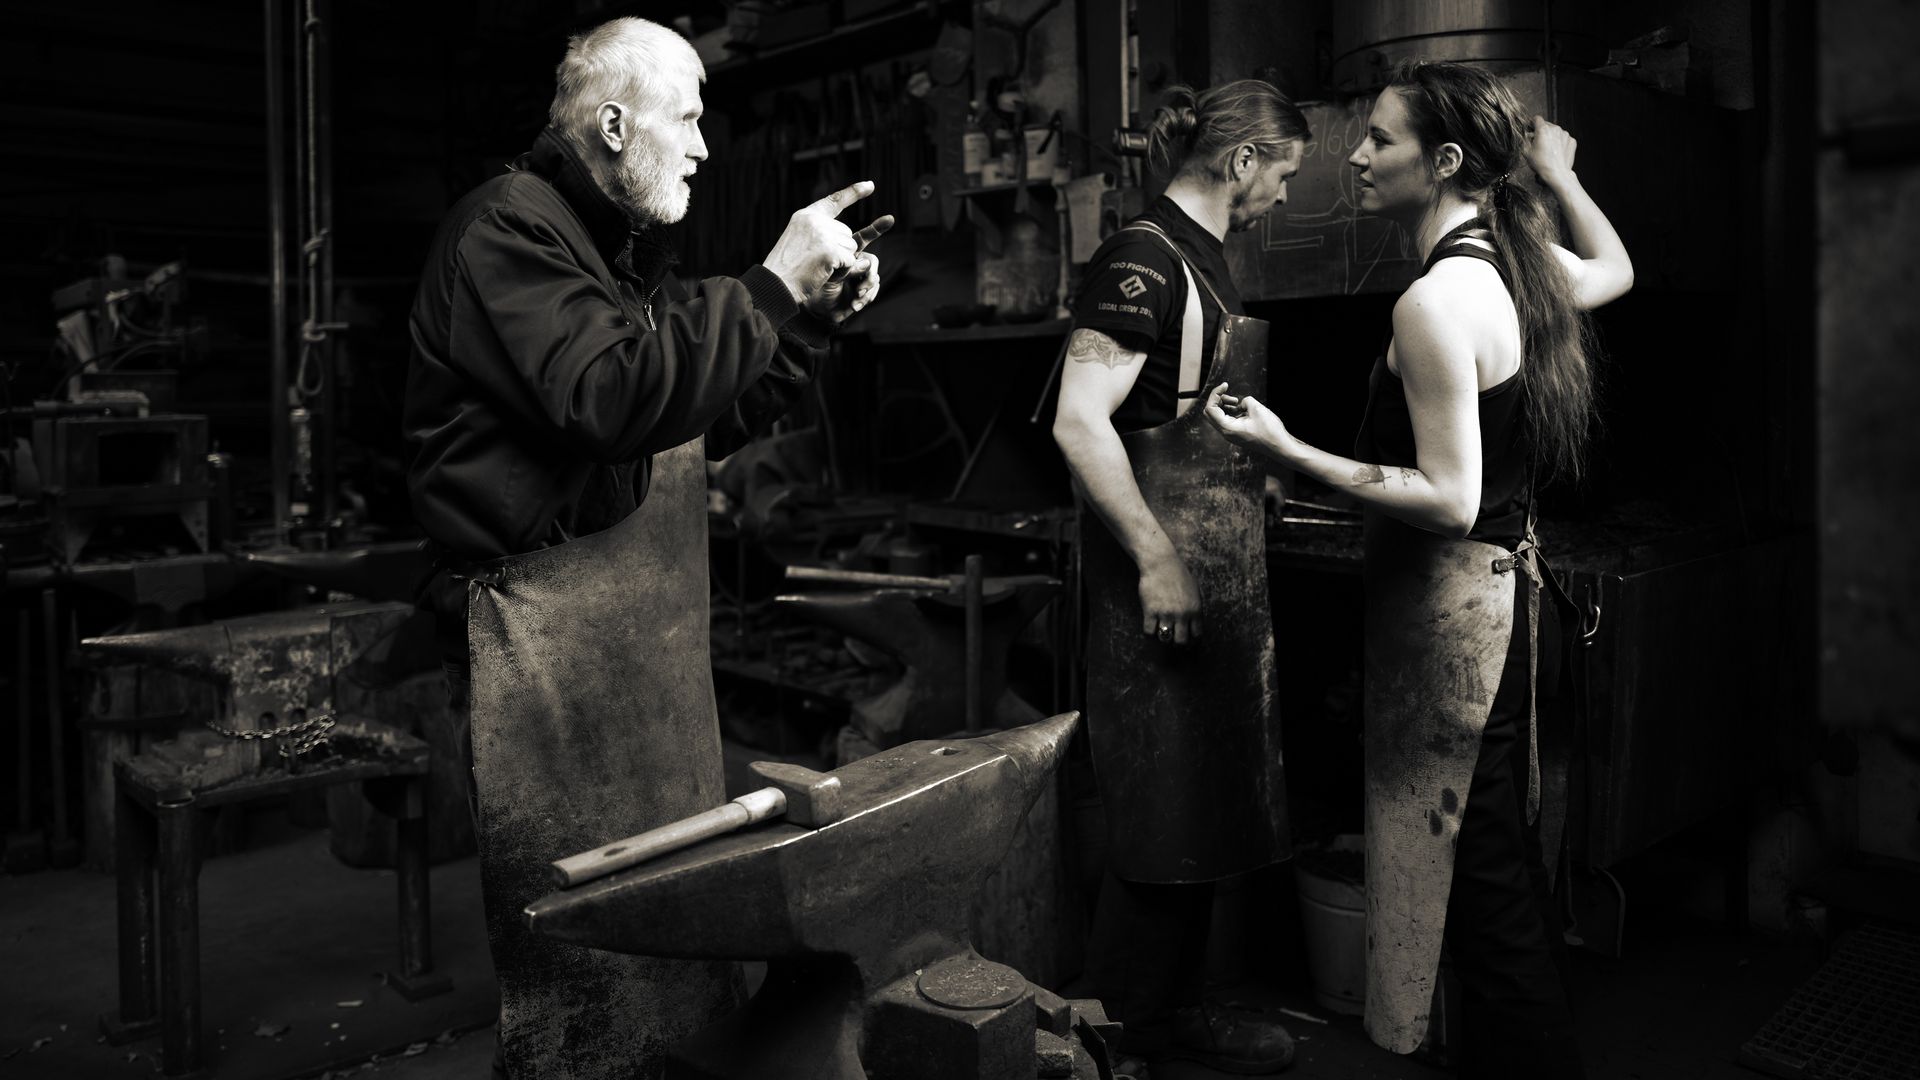 The family stands at their blacksmiths in Hohenprießnitz, regional products